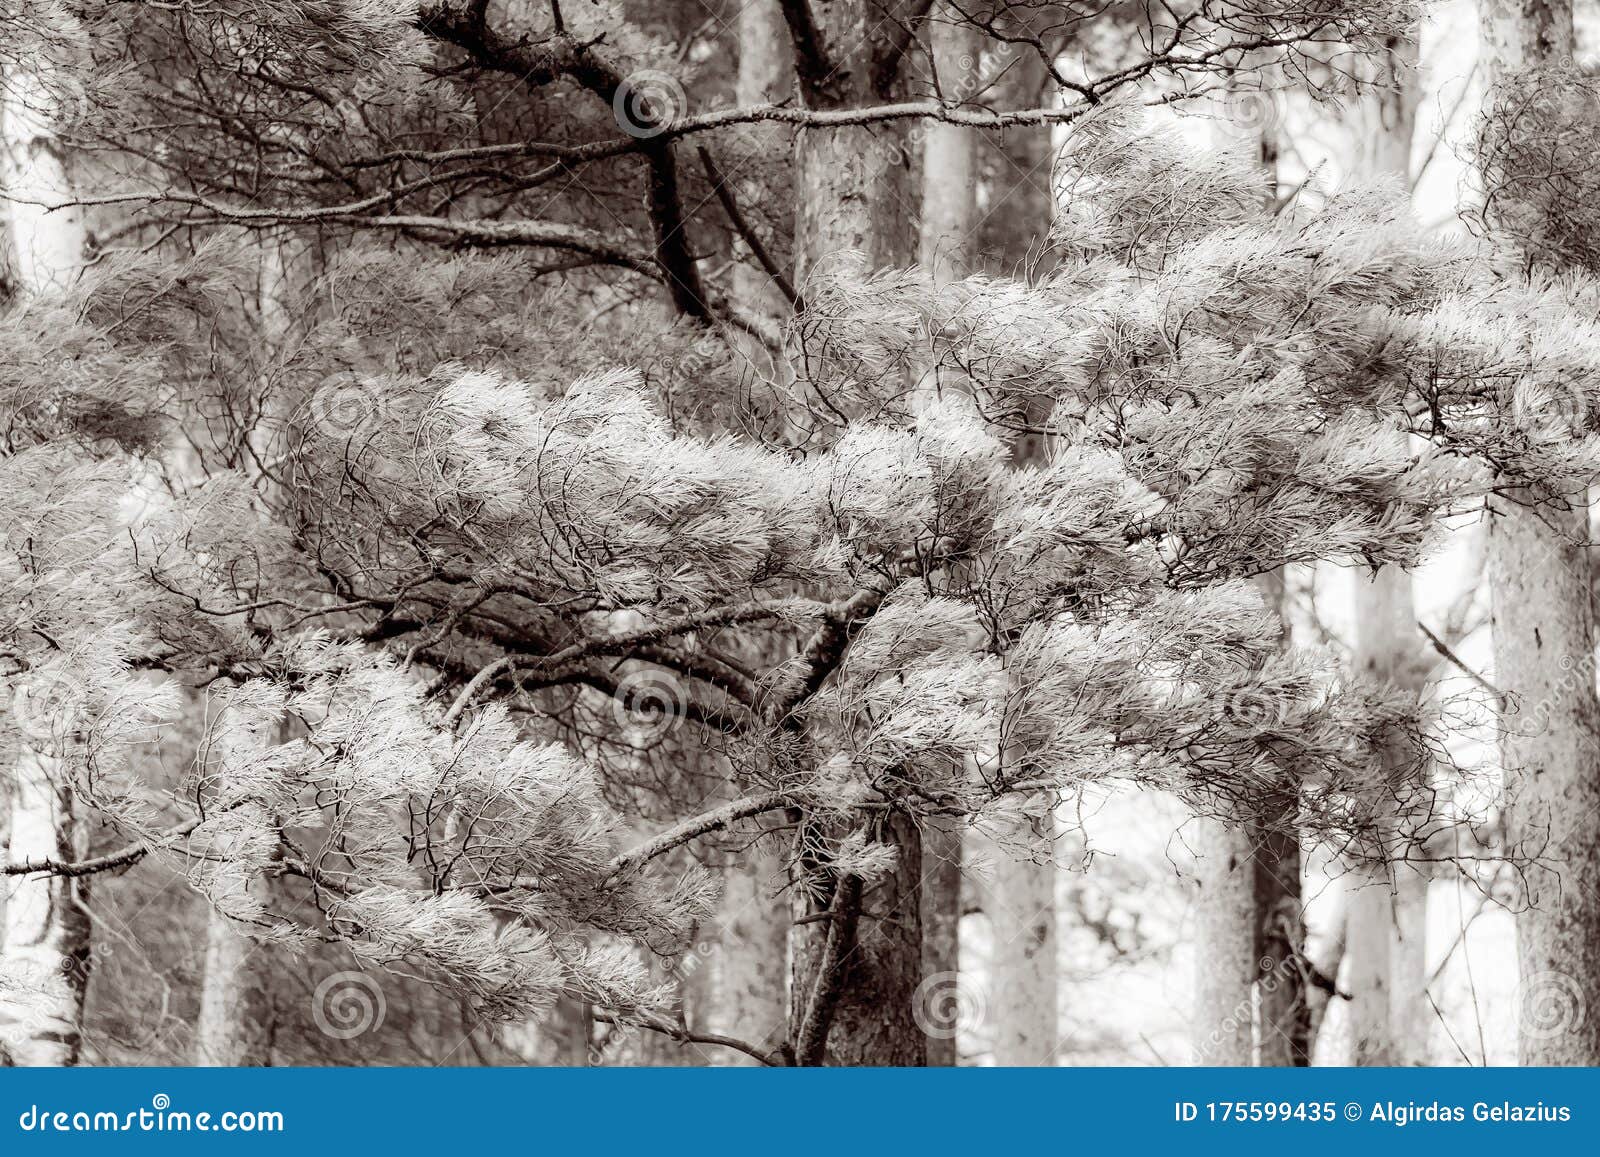 Pine Tree Branches on Windy Day Stock Image - Image of winter